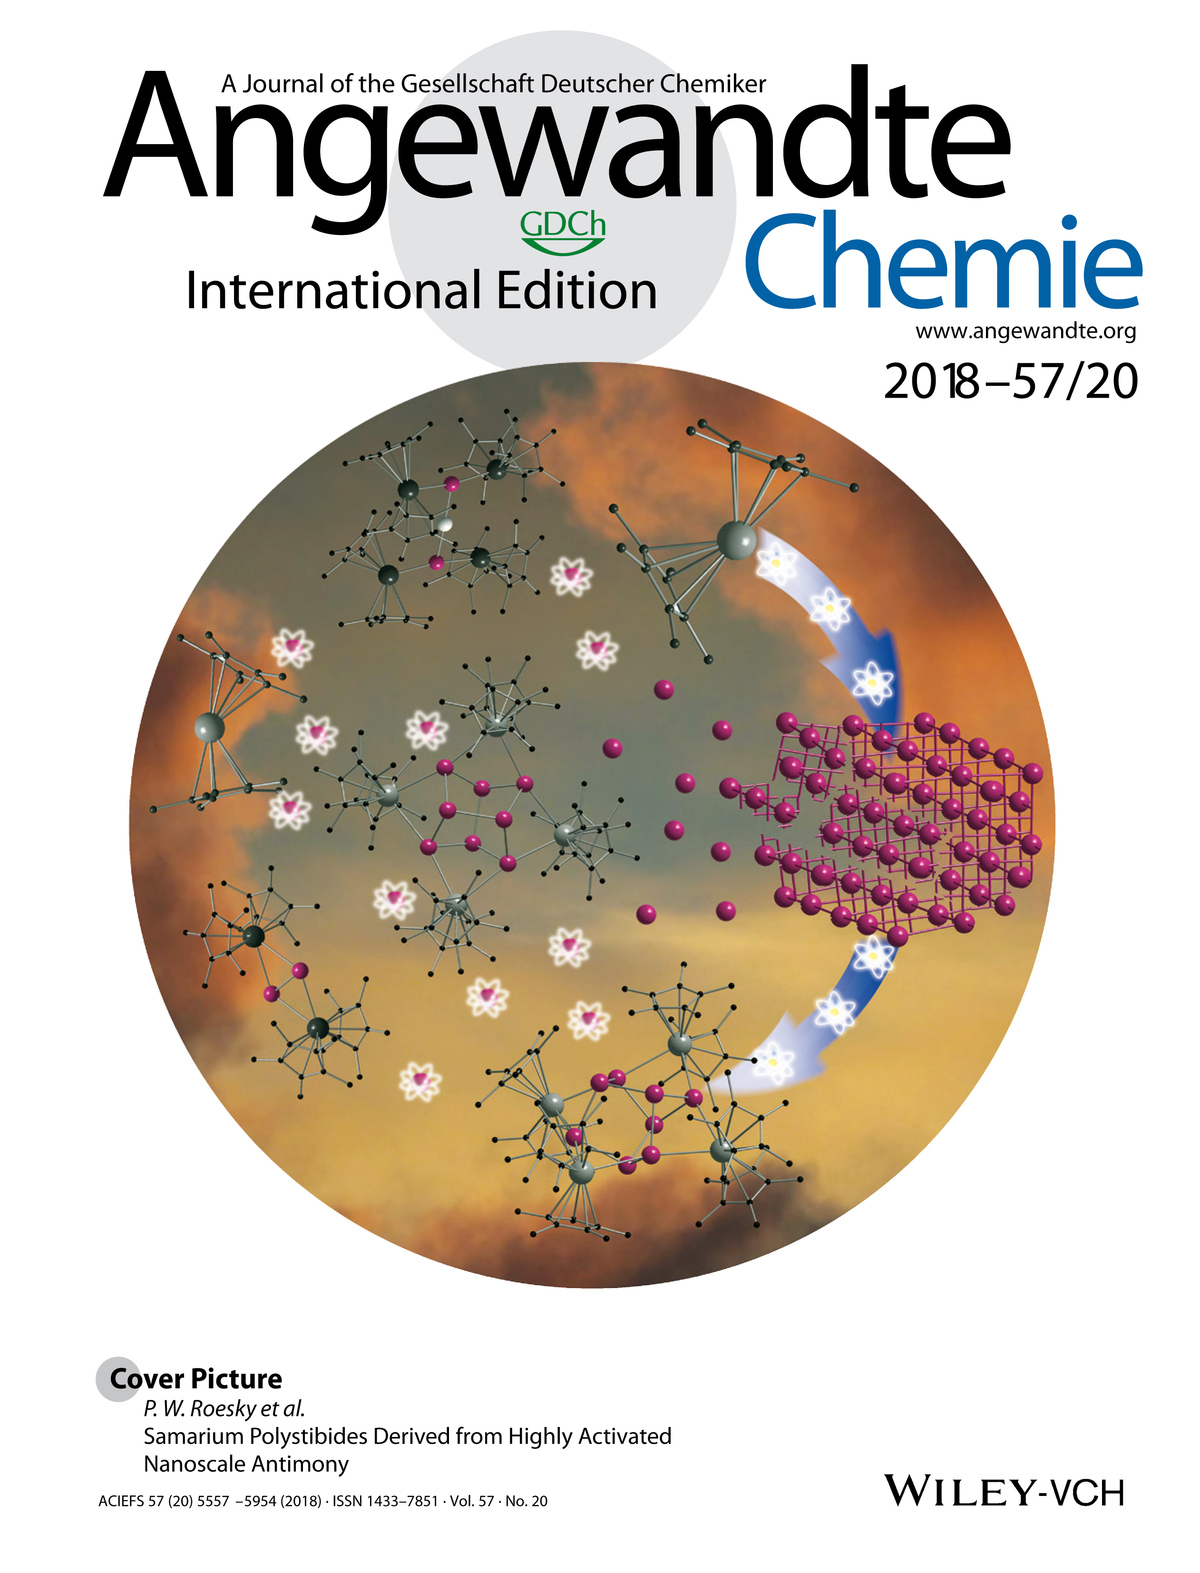 cover picture Angewandte Chemie 2018